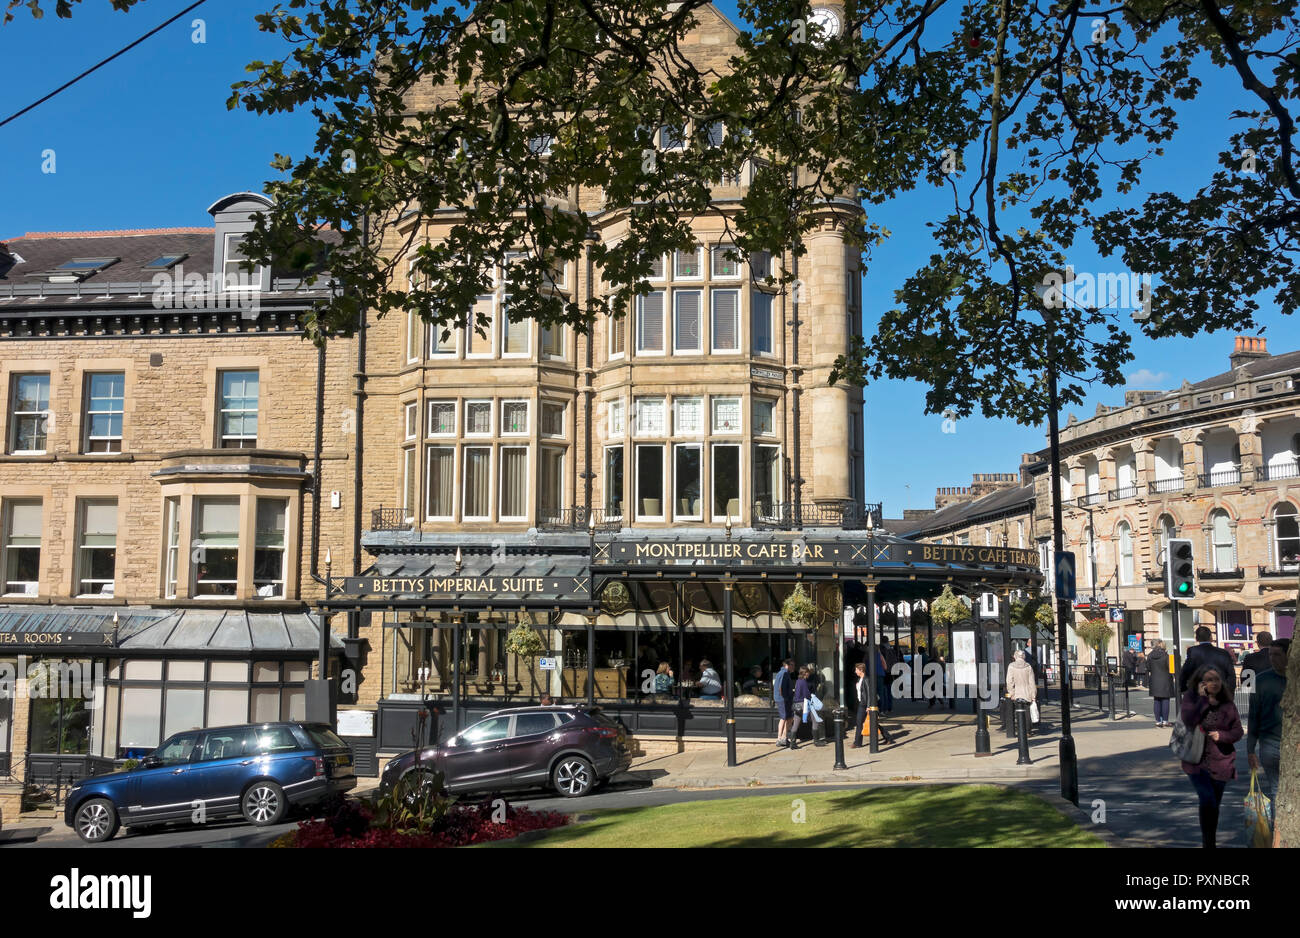 Bettys cafe and tea room rooms exterior in late summer Montpellier Parade Harrogate North Yorkshire England UK United Kingdom GB Great Britain Stock Photo